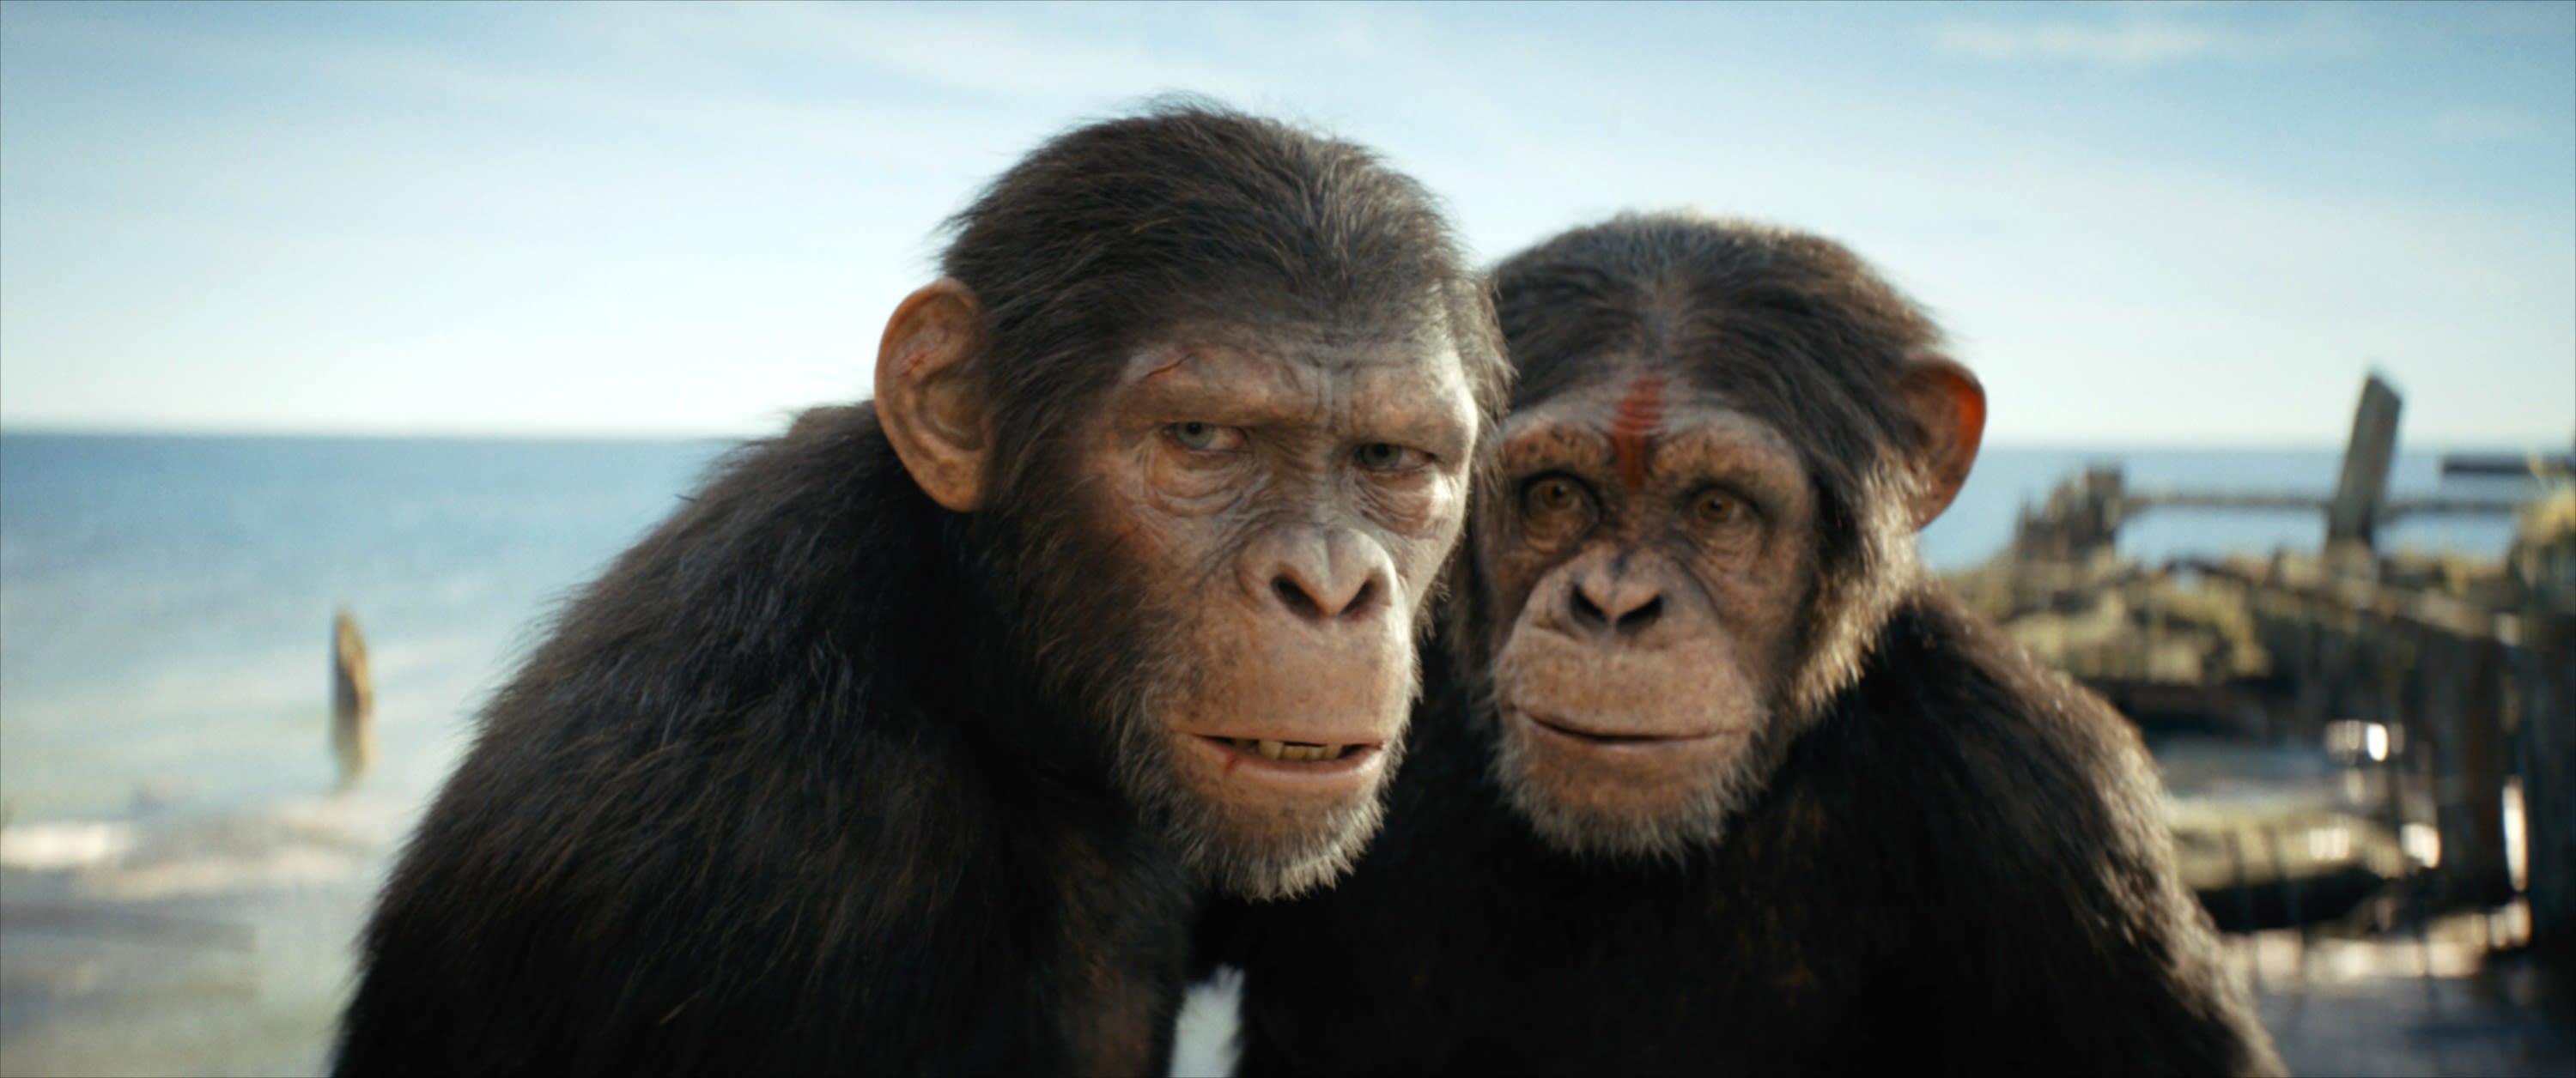 Box Office: ‘Kingdom of the Planet of the Apes’ Hits $237 Million Globally, ‘IF’ Nears $60 Million